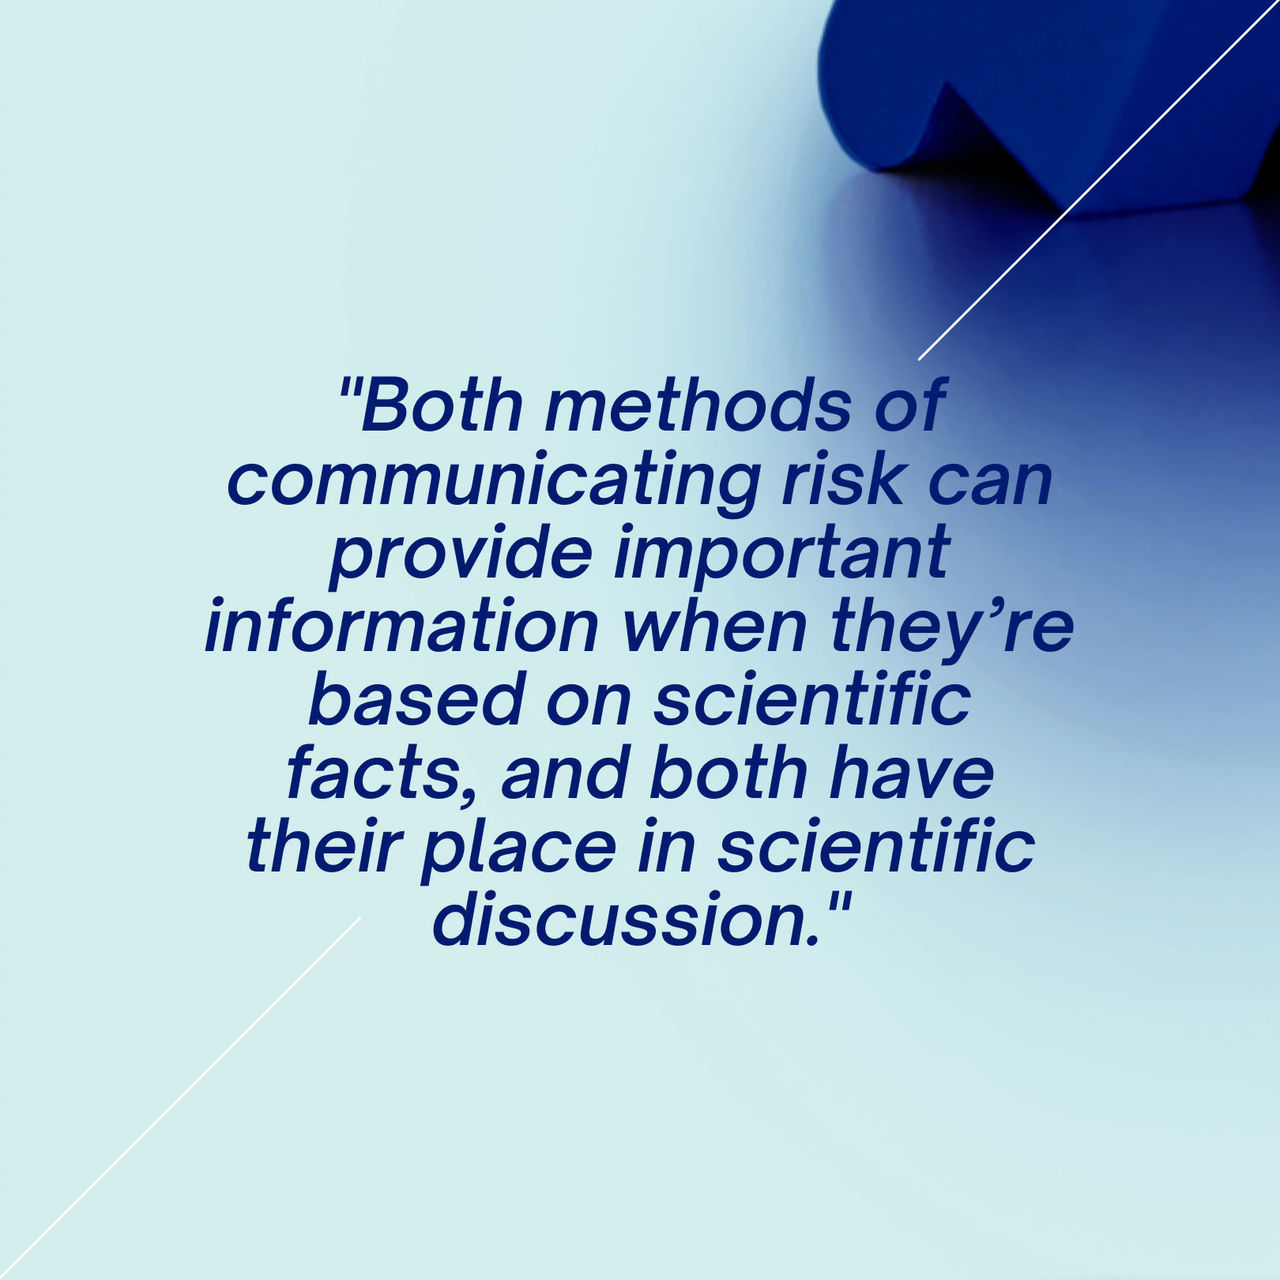 Both methods of communicating risk can provide important information they are based on scientific facts